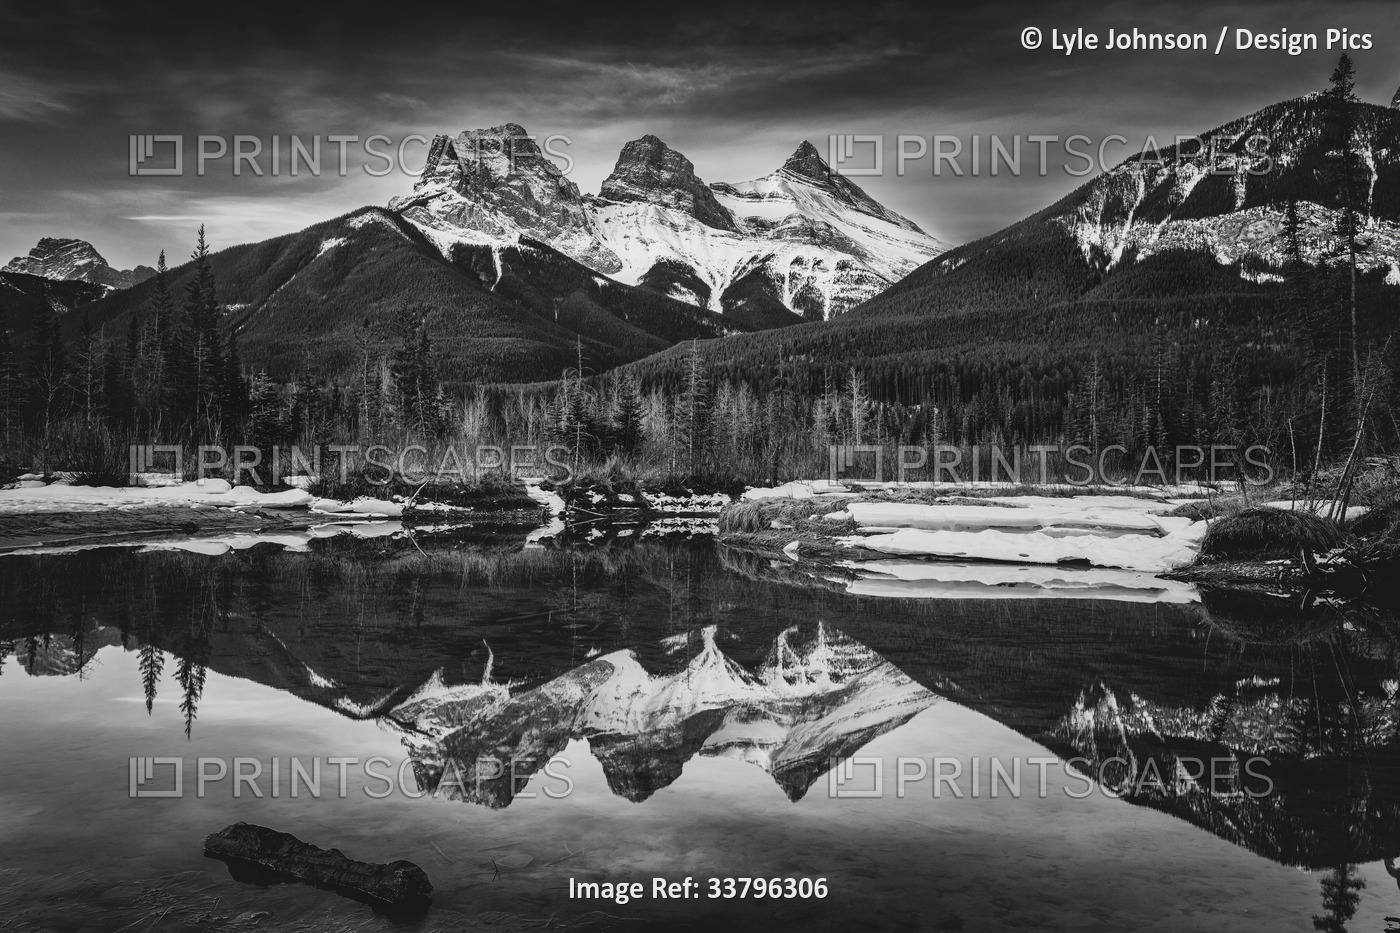 Three Sisters snow-capped mountain peaks reflected in a mirror image in a lake ...